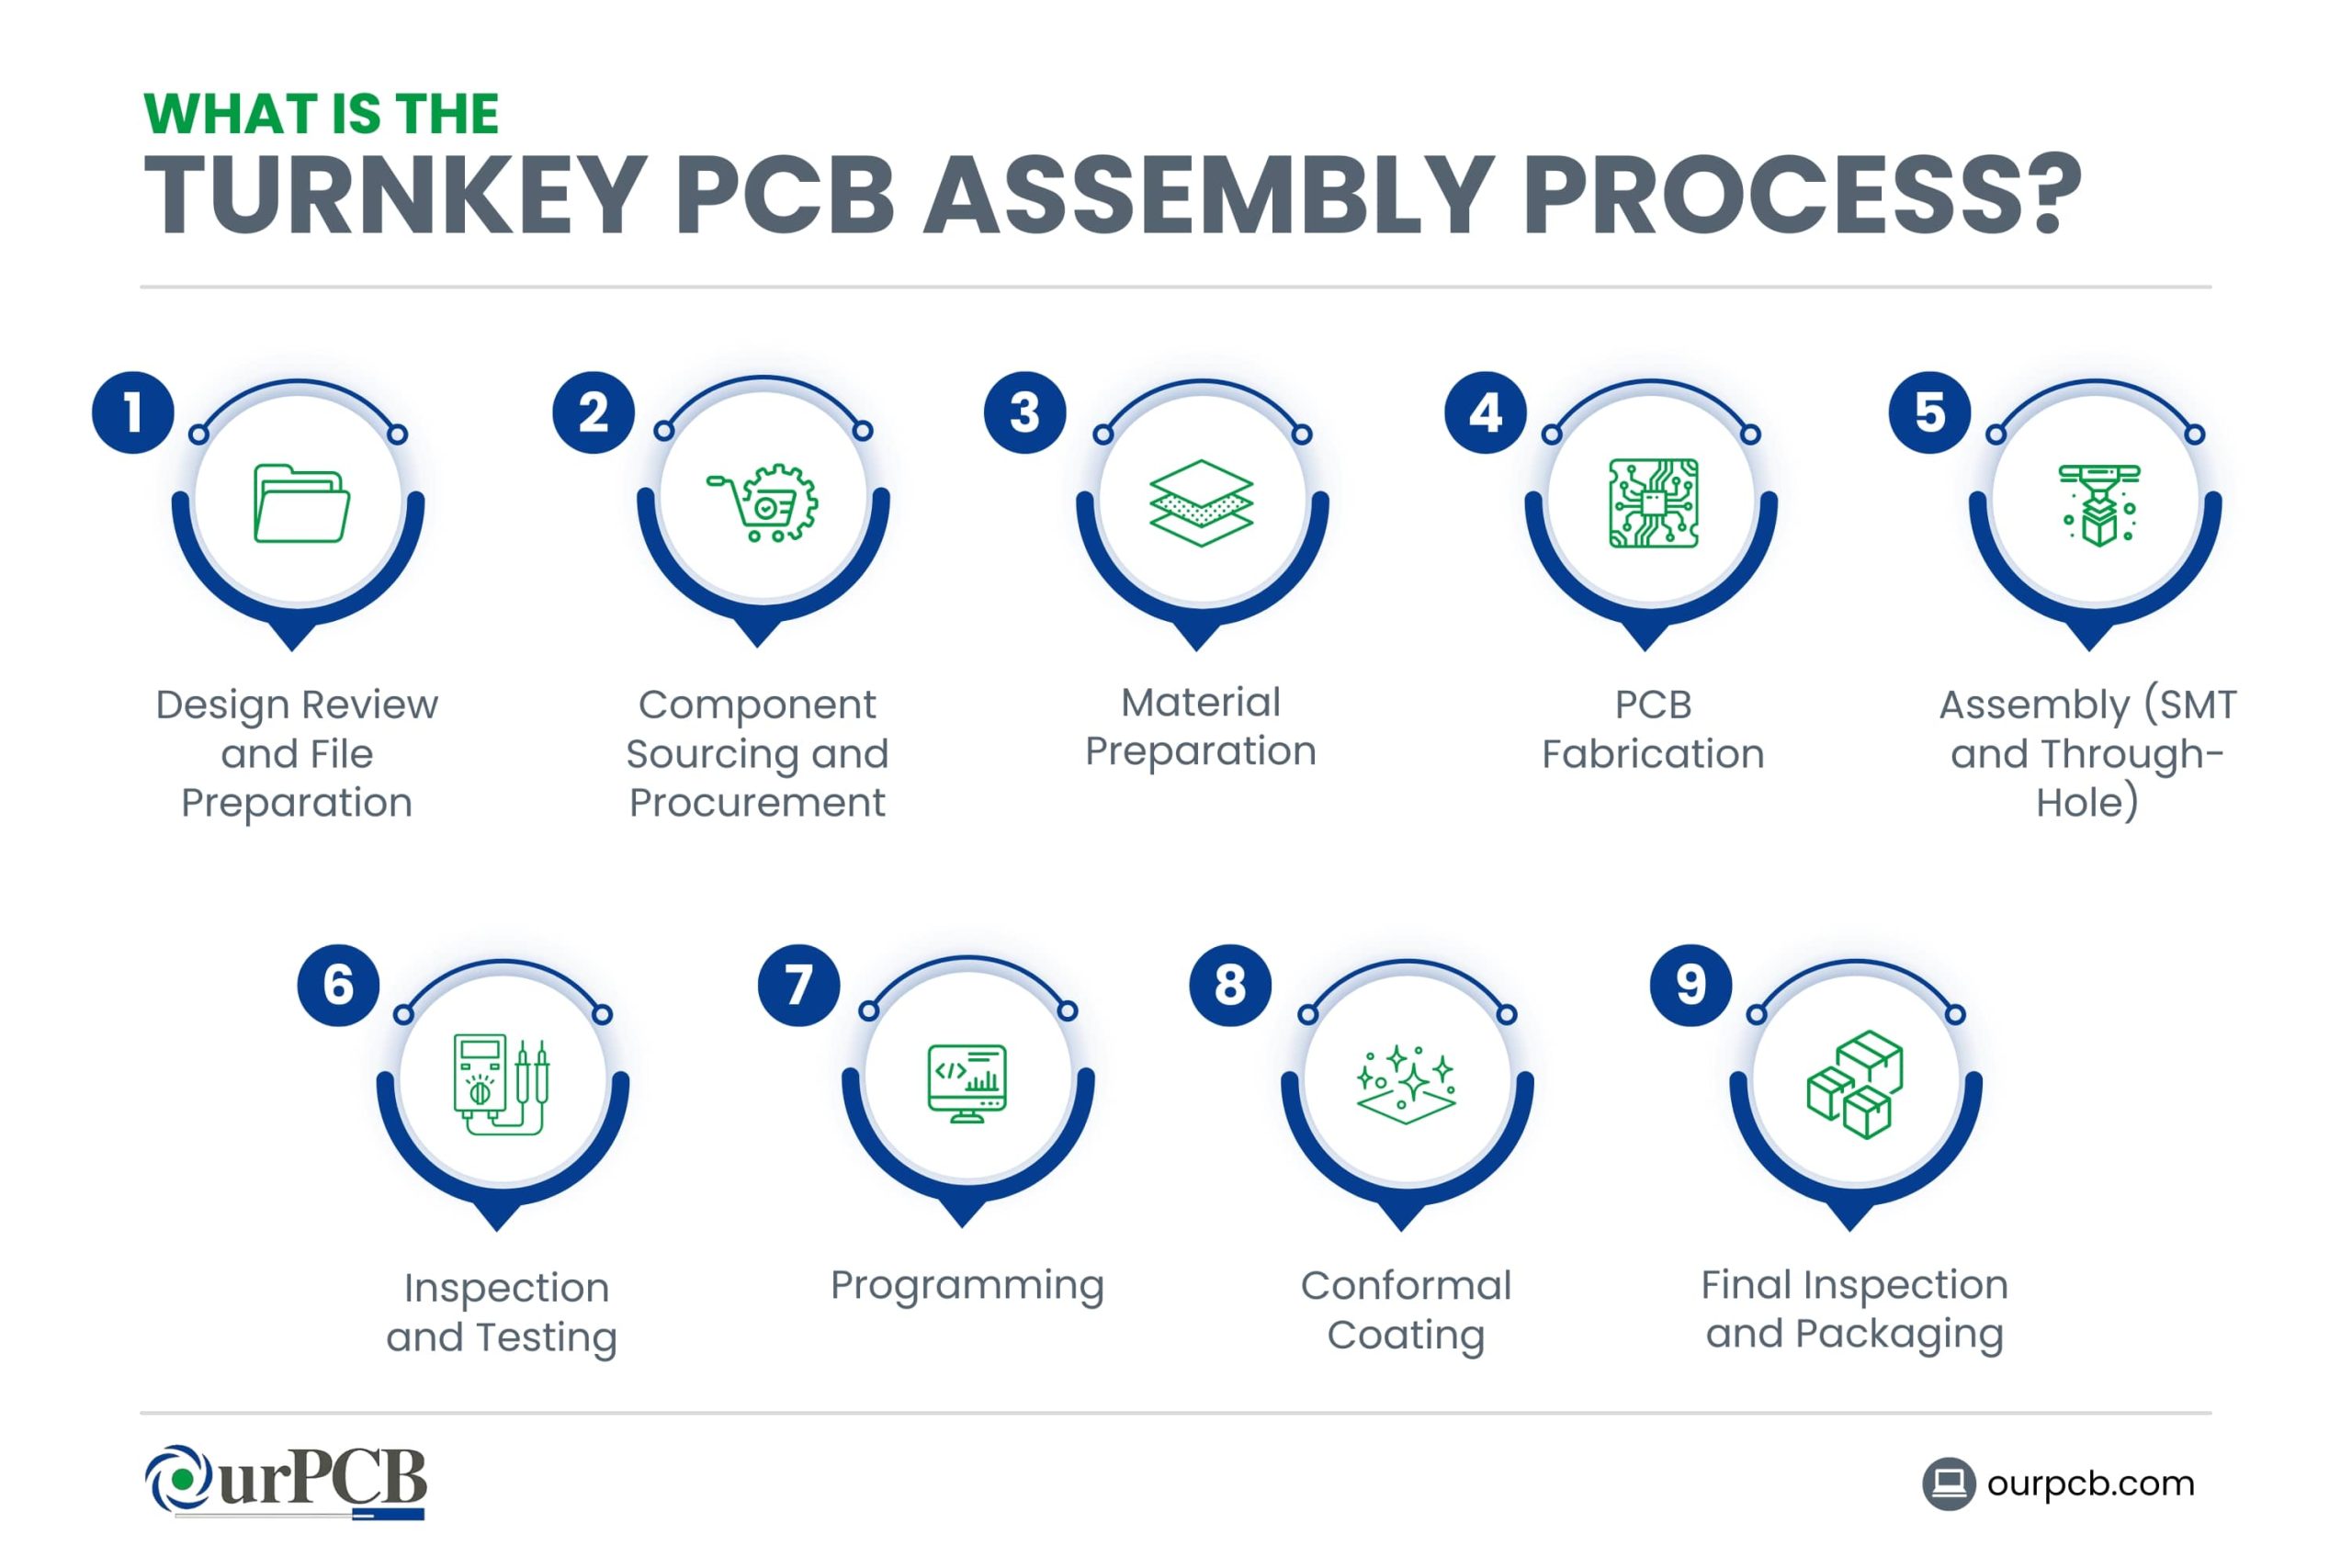 What is the Turnkey PCB Assembly Process?